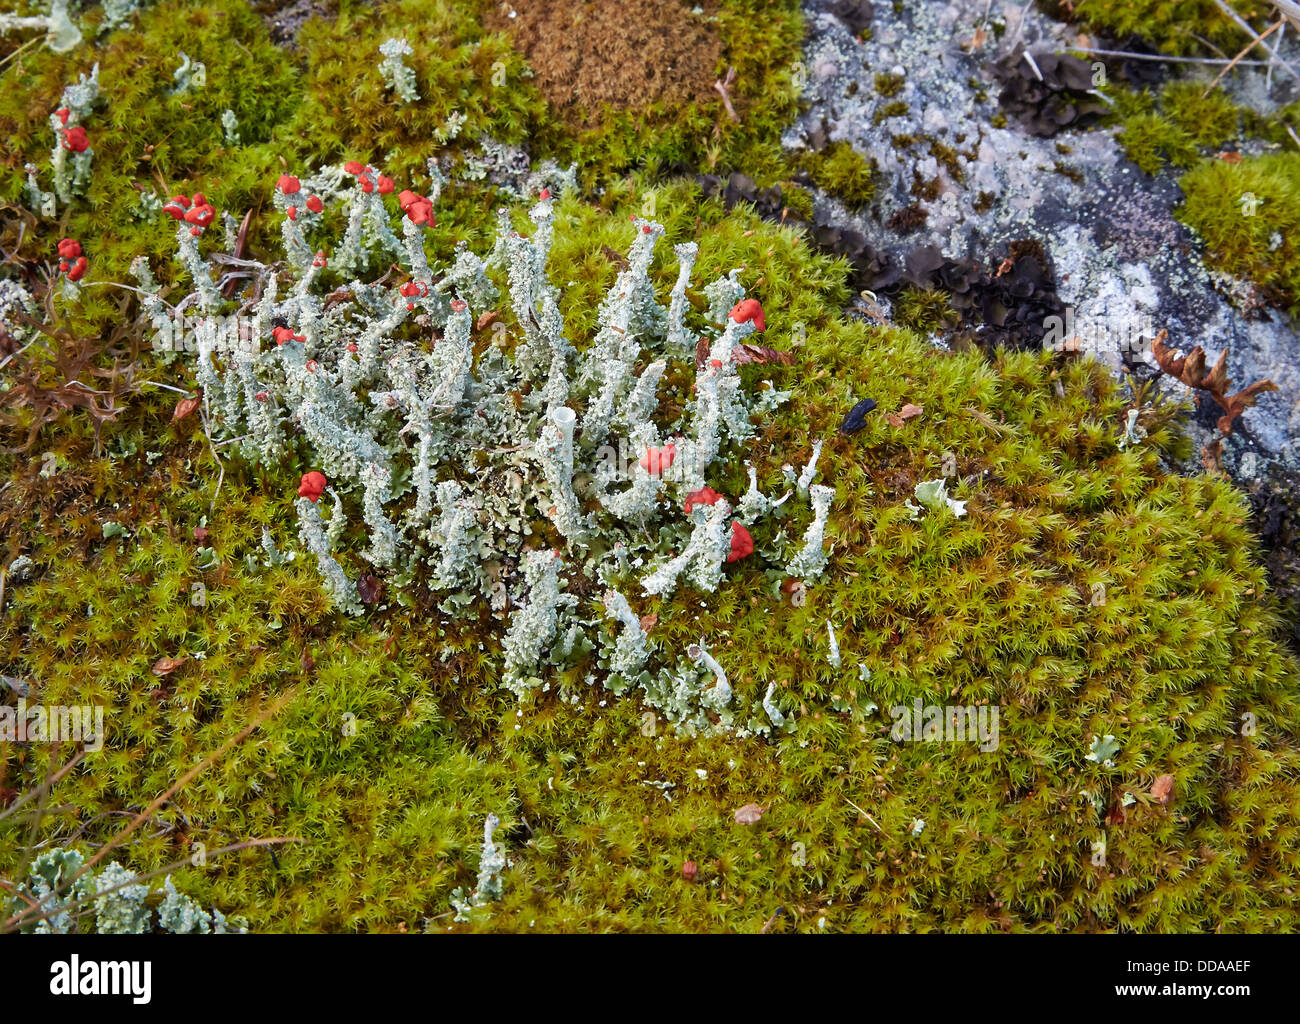 Cladonia lichen species with scarlet red fruiting bodies growing amongst moss at 1000m on a Norwegian mountain Stock Photo